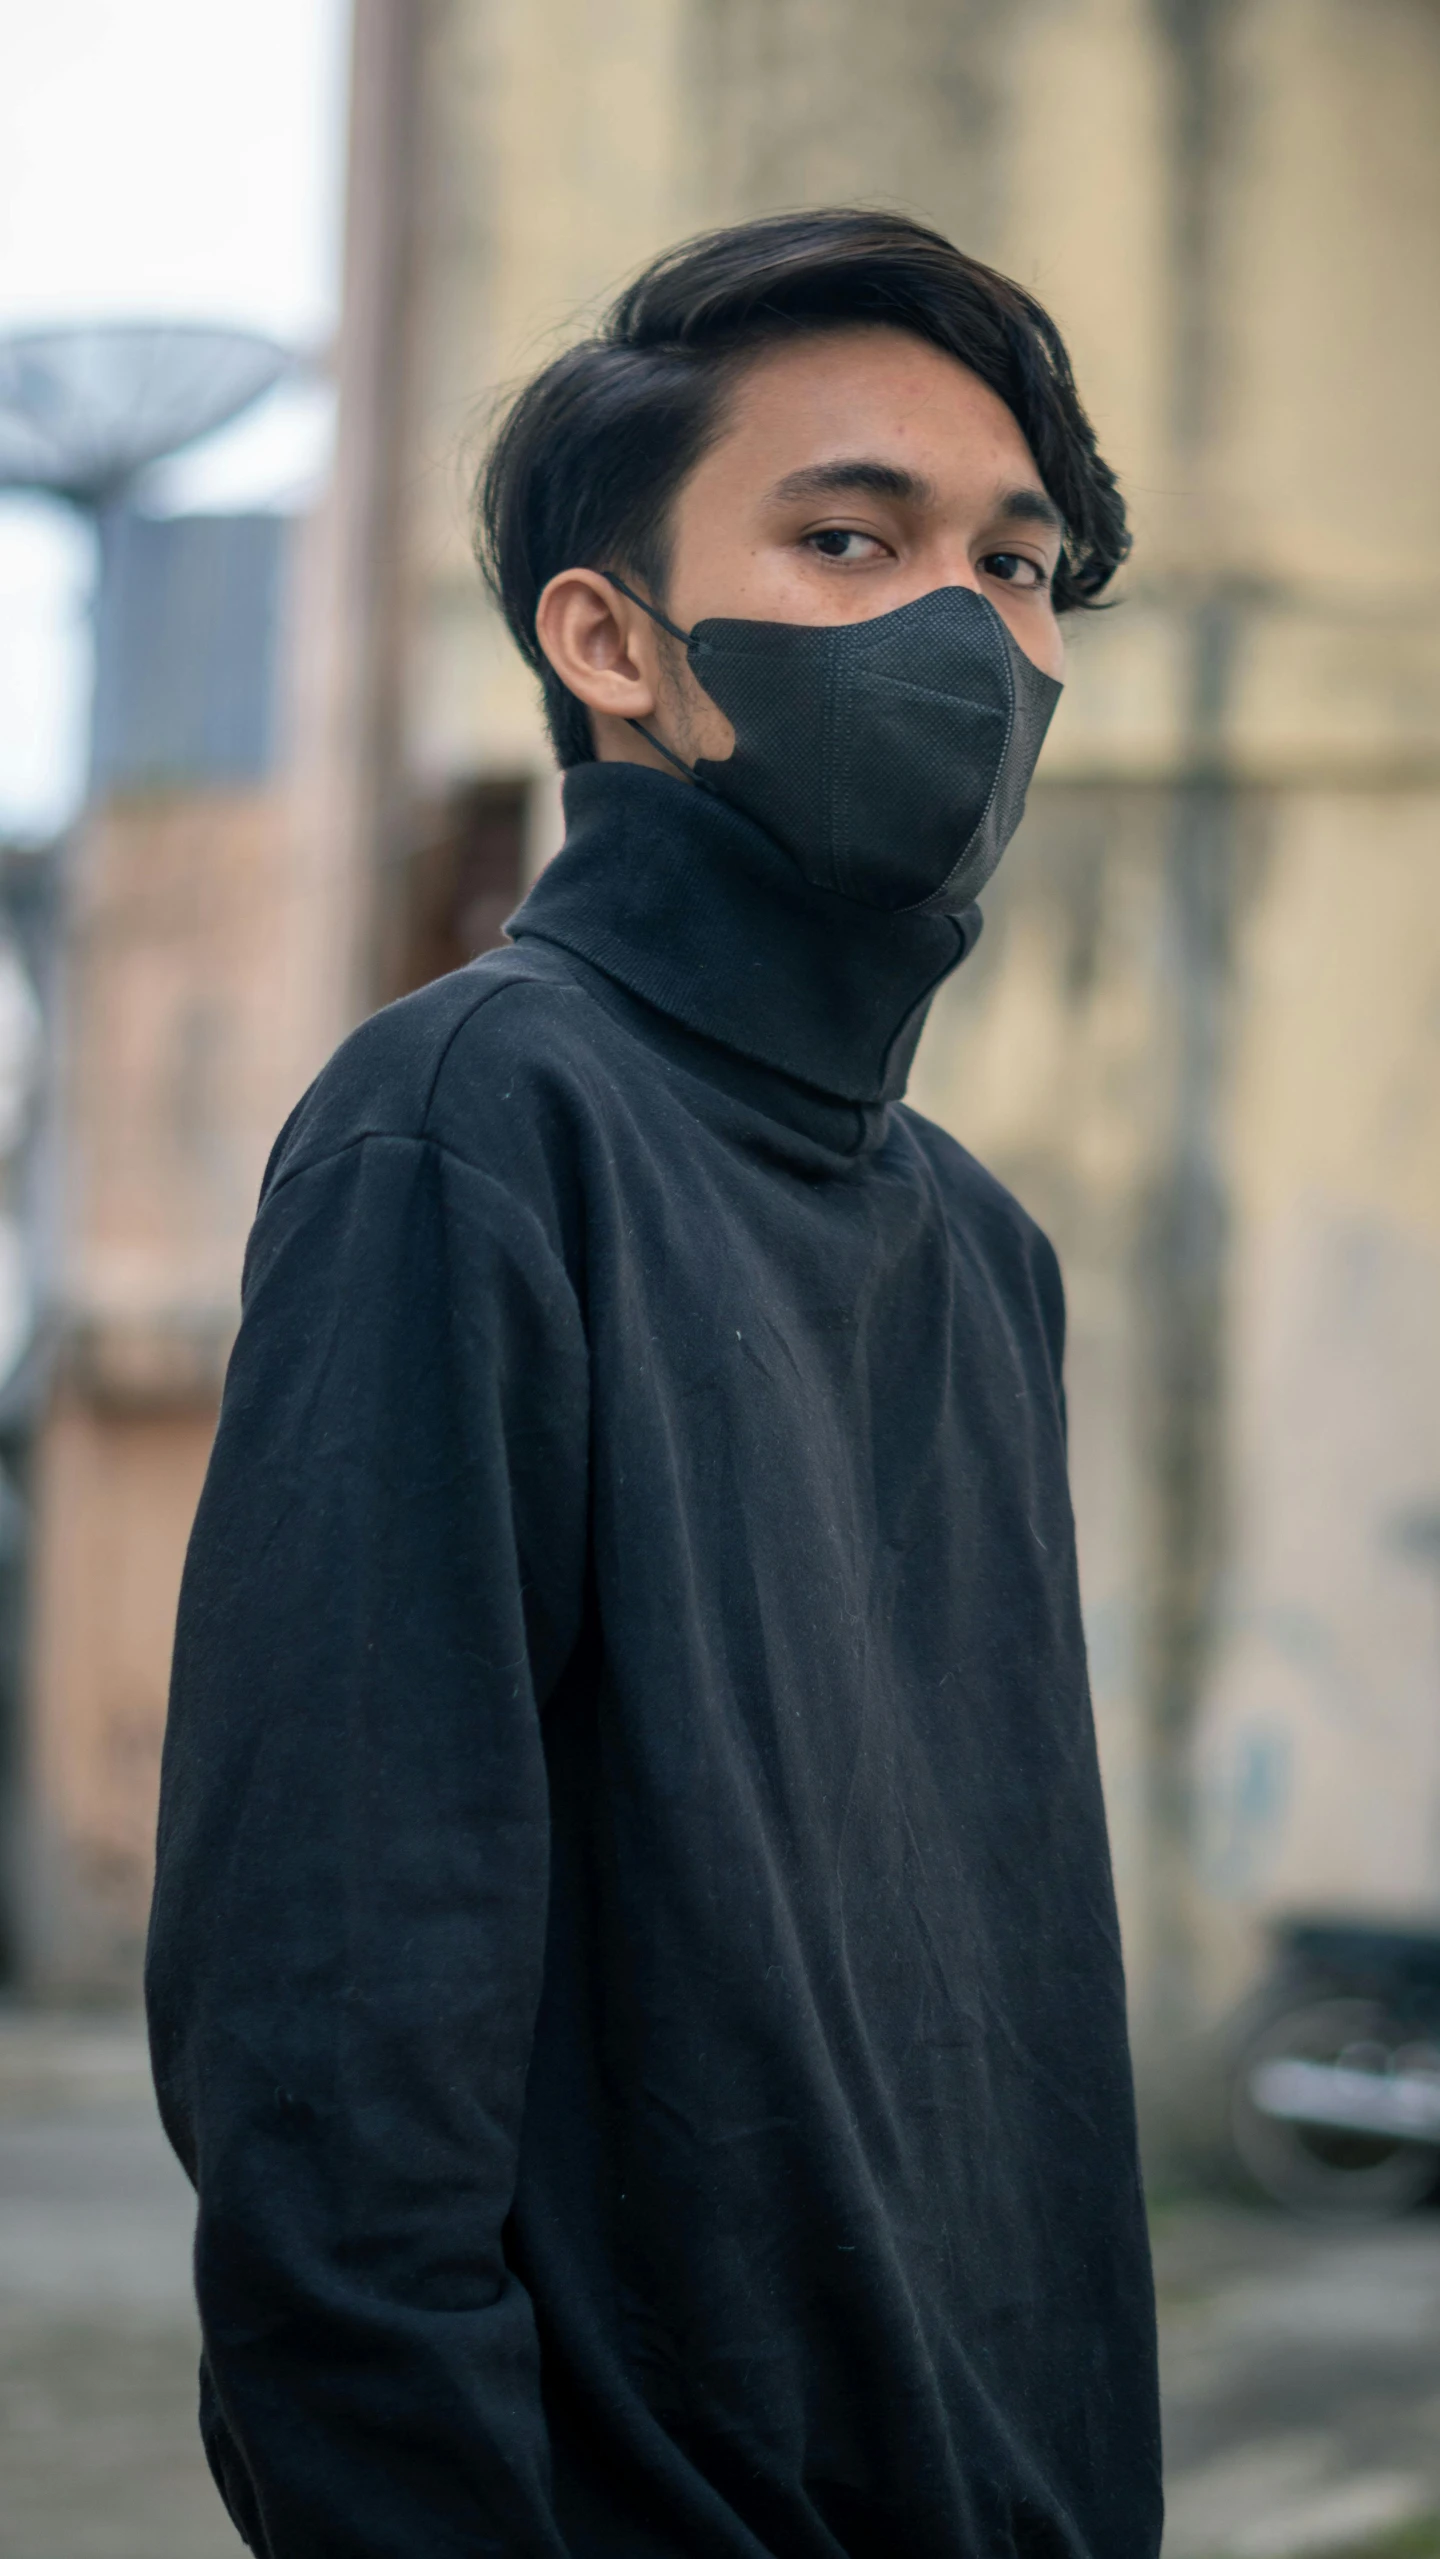 a young man wearing a black face mask, inspired by Kanō Naizen, unsplash contest winner, black turtle neck shirt, street clothes, high quality photo, dark. no text